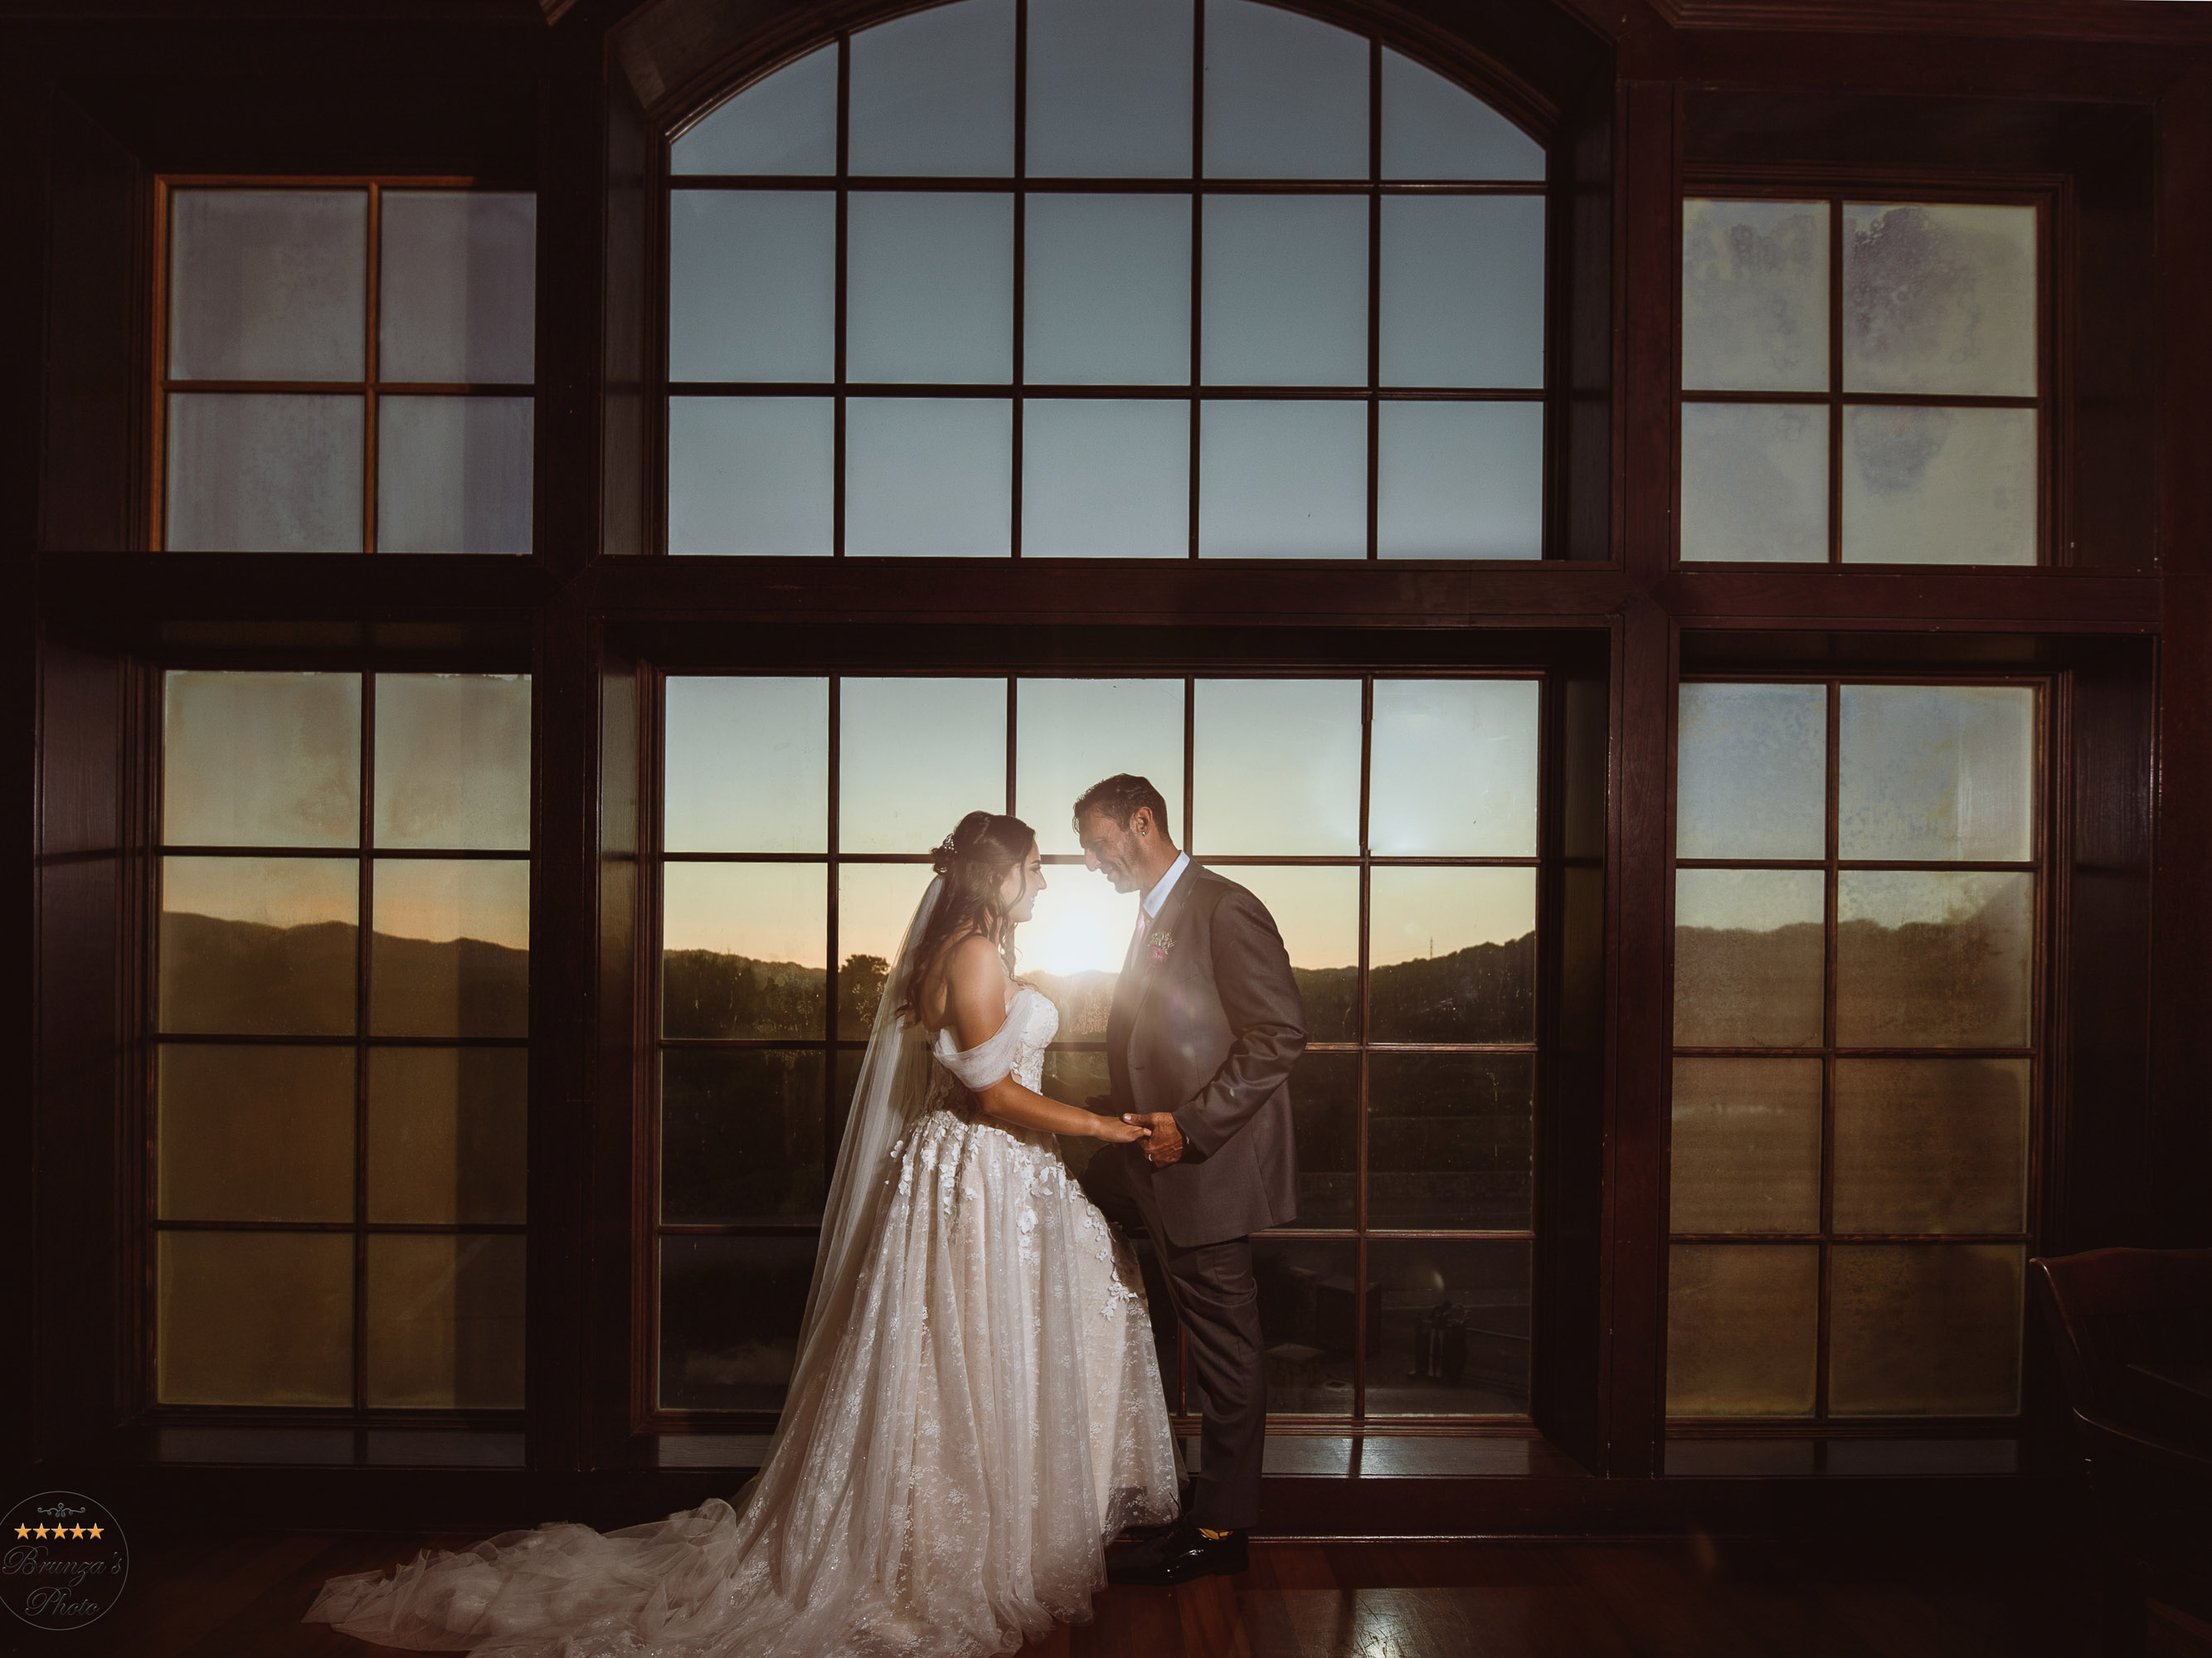 A bride and groom standing in front of a window at sunset.